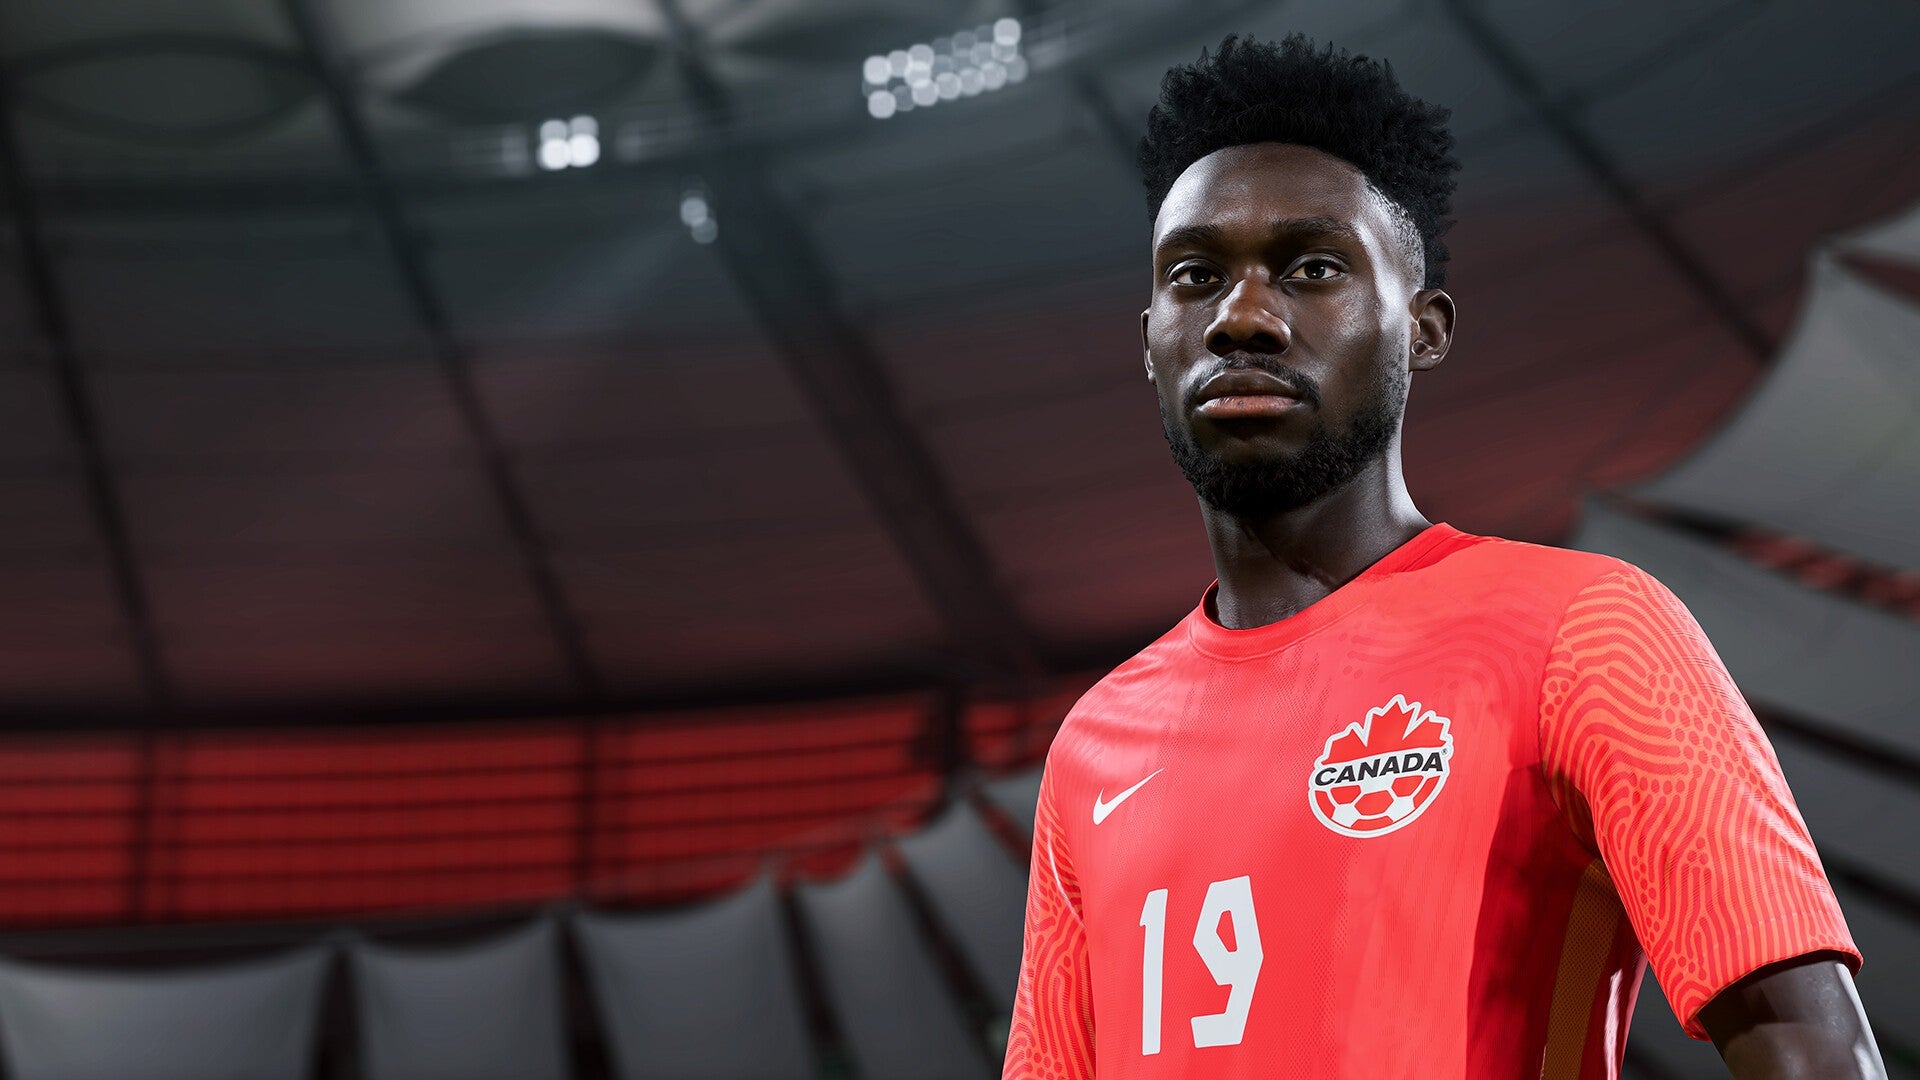 FIFA 23 image showing a player in their Canadian kit, with the blurred lights on the side of the stadium in the background.